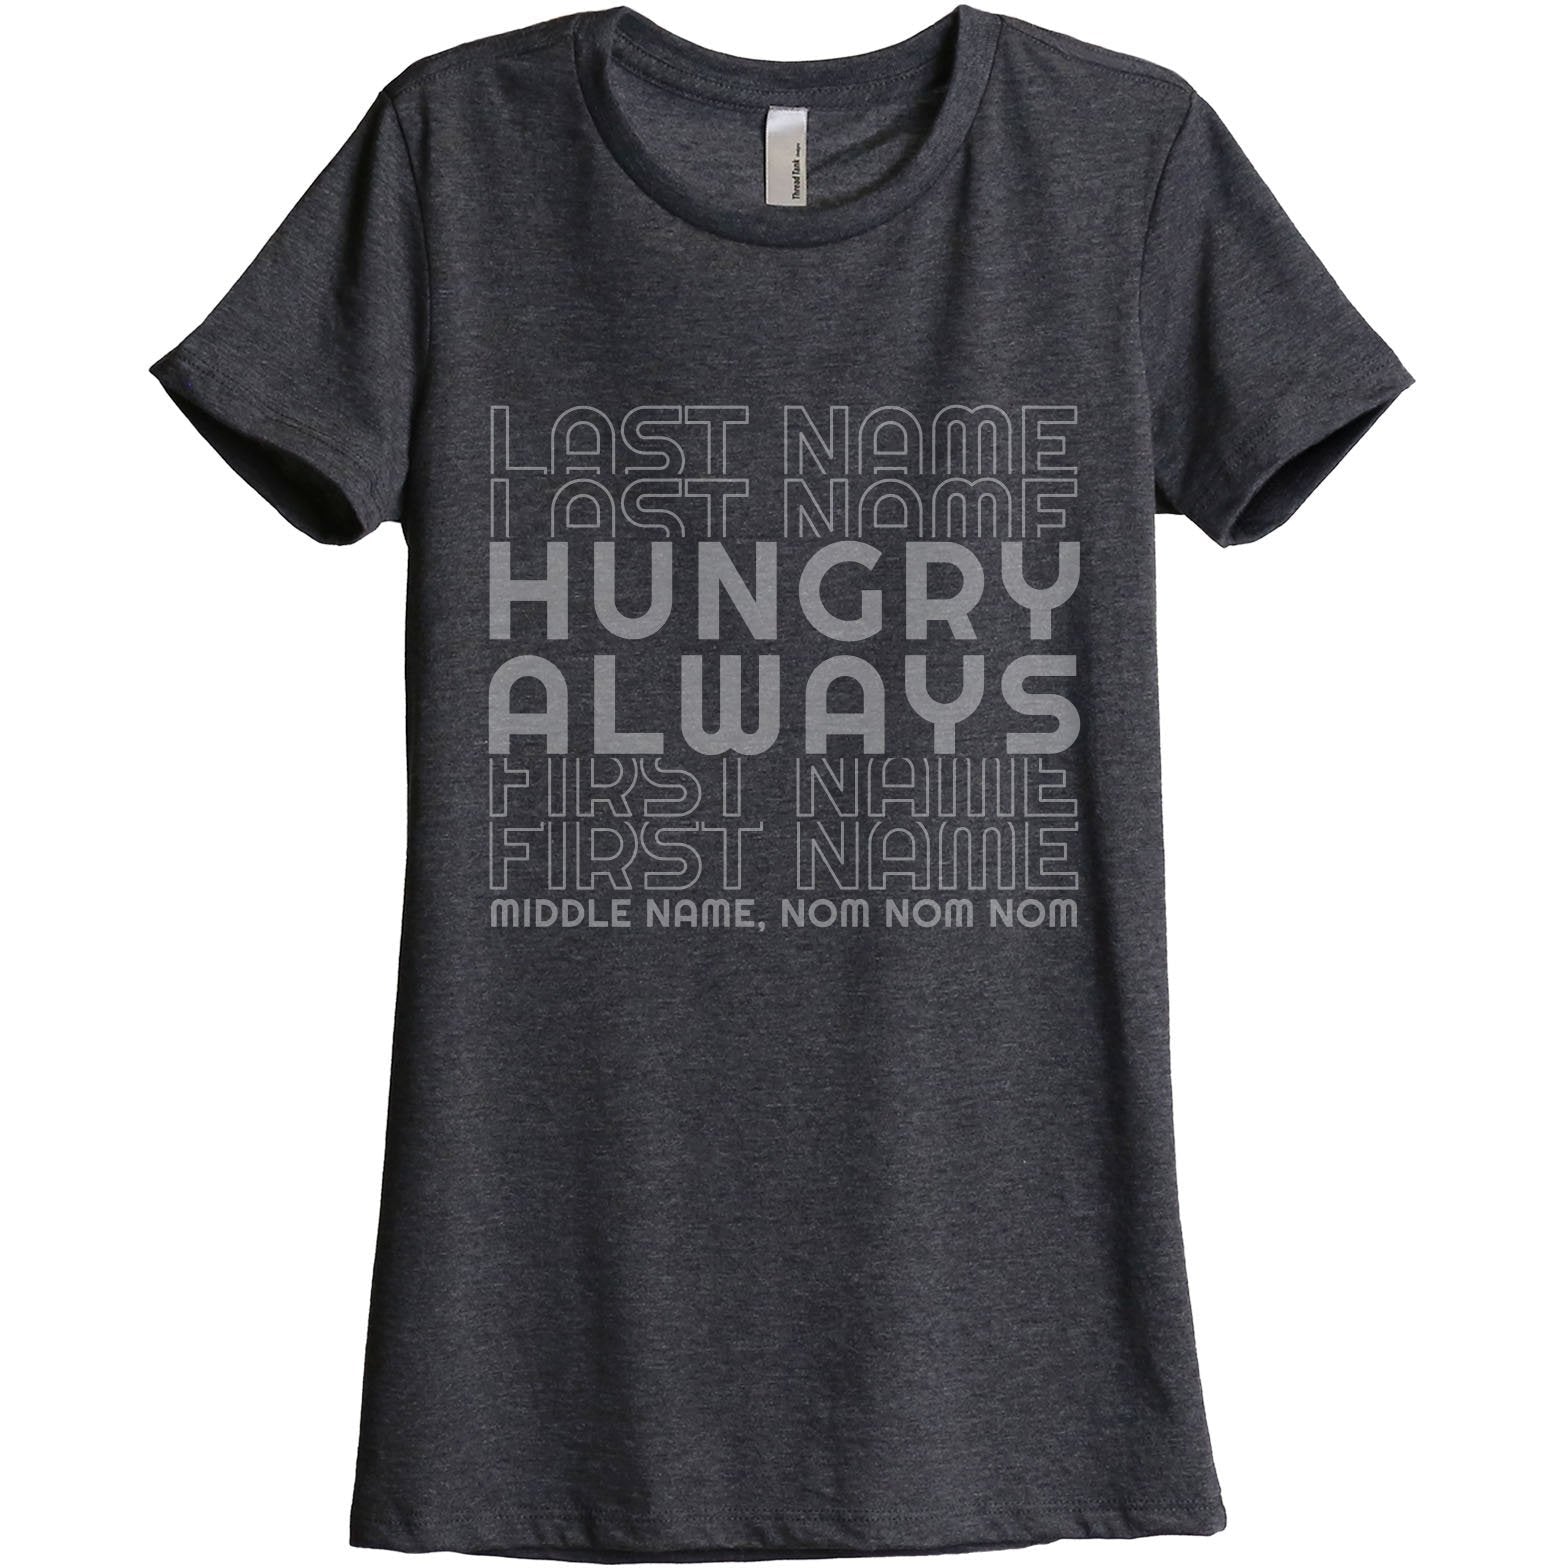 Last Name Hungry First Name Always - Stories You Can Wear